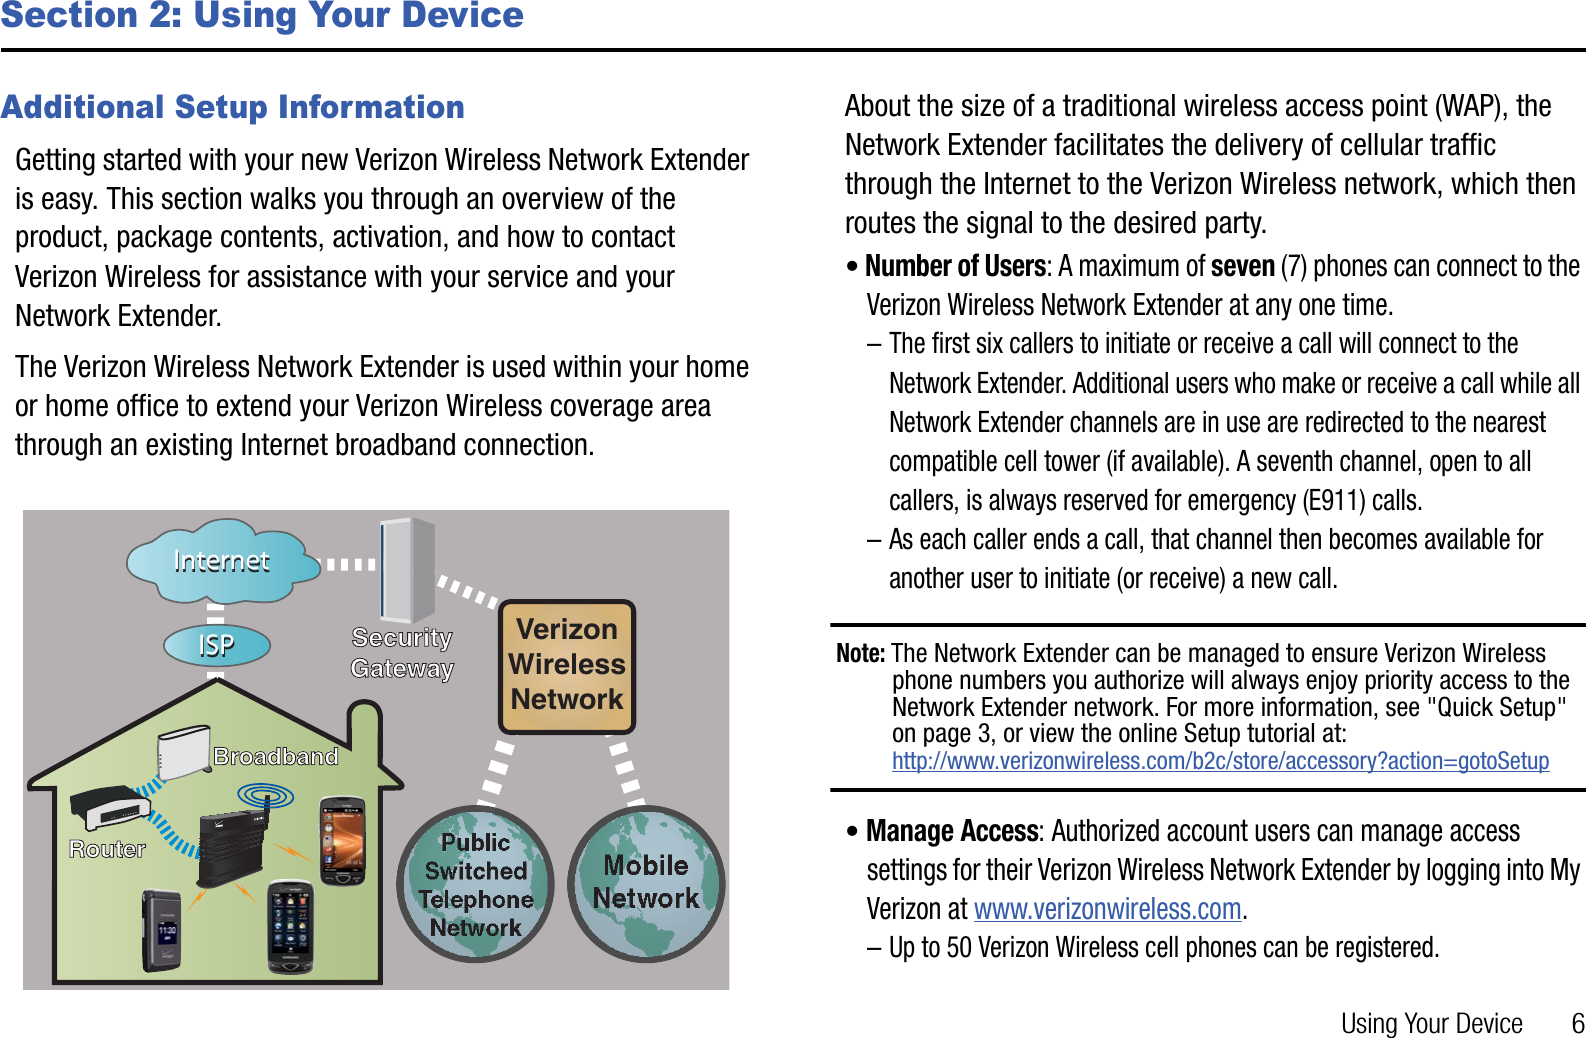 Using Your Device       6Section 2: Using Your DeviceAdditional Setup InformationGetting started with your new Verizon Wireless Network Extender is easy. This section walks you through an overview of the product, package contents, activation, and how to contact Verizon Wireless for assistance with your service and your Network Extender.The Verizon Wireless Network Extender is used within your home or home office to extend your Verizon Wireless coverage area through an existing Internet broadband connection. About the size of a traditional wireless access point (WAP), the Network Extender facilitates the delivery of cellular traffic through the Internet to the Verizon Wireless network, which then routes the signal to the desired party.•Number of Users: A maximum of seven (7) phones can connect to the Verizon Wireless Network Extender at any one time.–The first six callers to initiate or receive a call will connect to the Network Extender. Additional users who make or receive a call while all Network Extender channels are in use are redirected to the nearest compatible cell tower (if available). A seventh channel, open to all callers, is always reserved for emergency (E911) calls.–As each caller ends a call, that channel then becomes available for another user to initiate (or receive) a new call.Note: The Network Extender can be managed to ensure Verizon Wireless phone numbers you authorize will always enjoy priority access to the Network Extender network. For more information, see &quot;Quick Setup&quot; on page 3, or view the online Setup tutorial at: http://www.verizonwireless.com/b2c/store/accessory?action=gotoSetup•Manage Access: Authorized account users can manage access settings for their Verizon Wireless Network Extender by logging into My Verizon at www.verizonwireless.com.–Up to 50 Verizon Wireless cell phones can be registered.InternetInternetSecuritySecurityGatewayGatewayVerizonWirelessNetworkRouterRouterBroadbandBroadbandISPISPPublicSwitchedTelephoneNetworkMobileNetwork